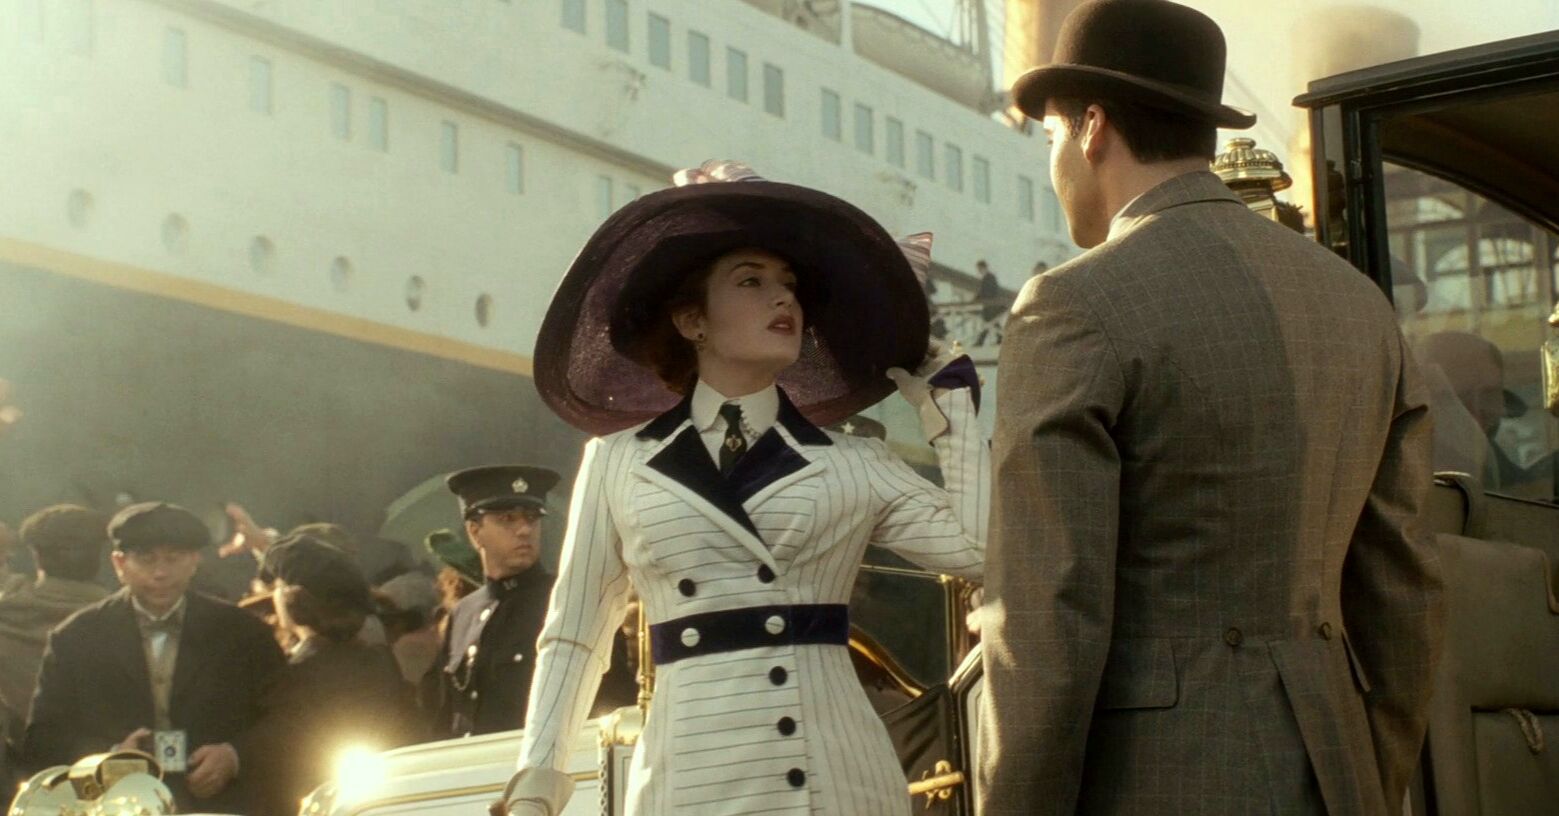 Rose DeWitt Bukater boarding the Titanic..oh the hat, how I love the hat